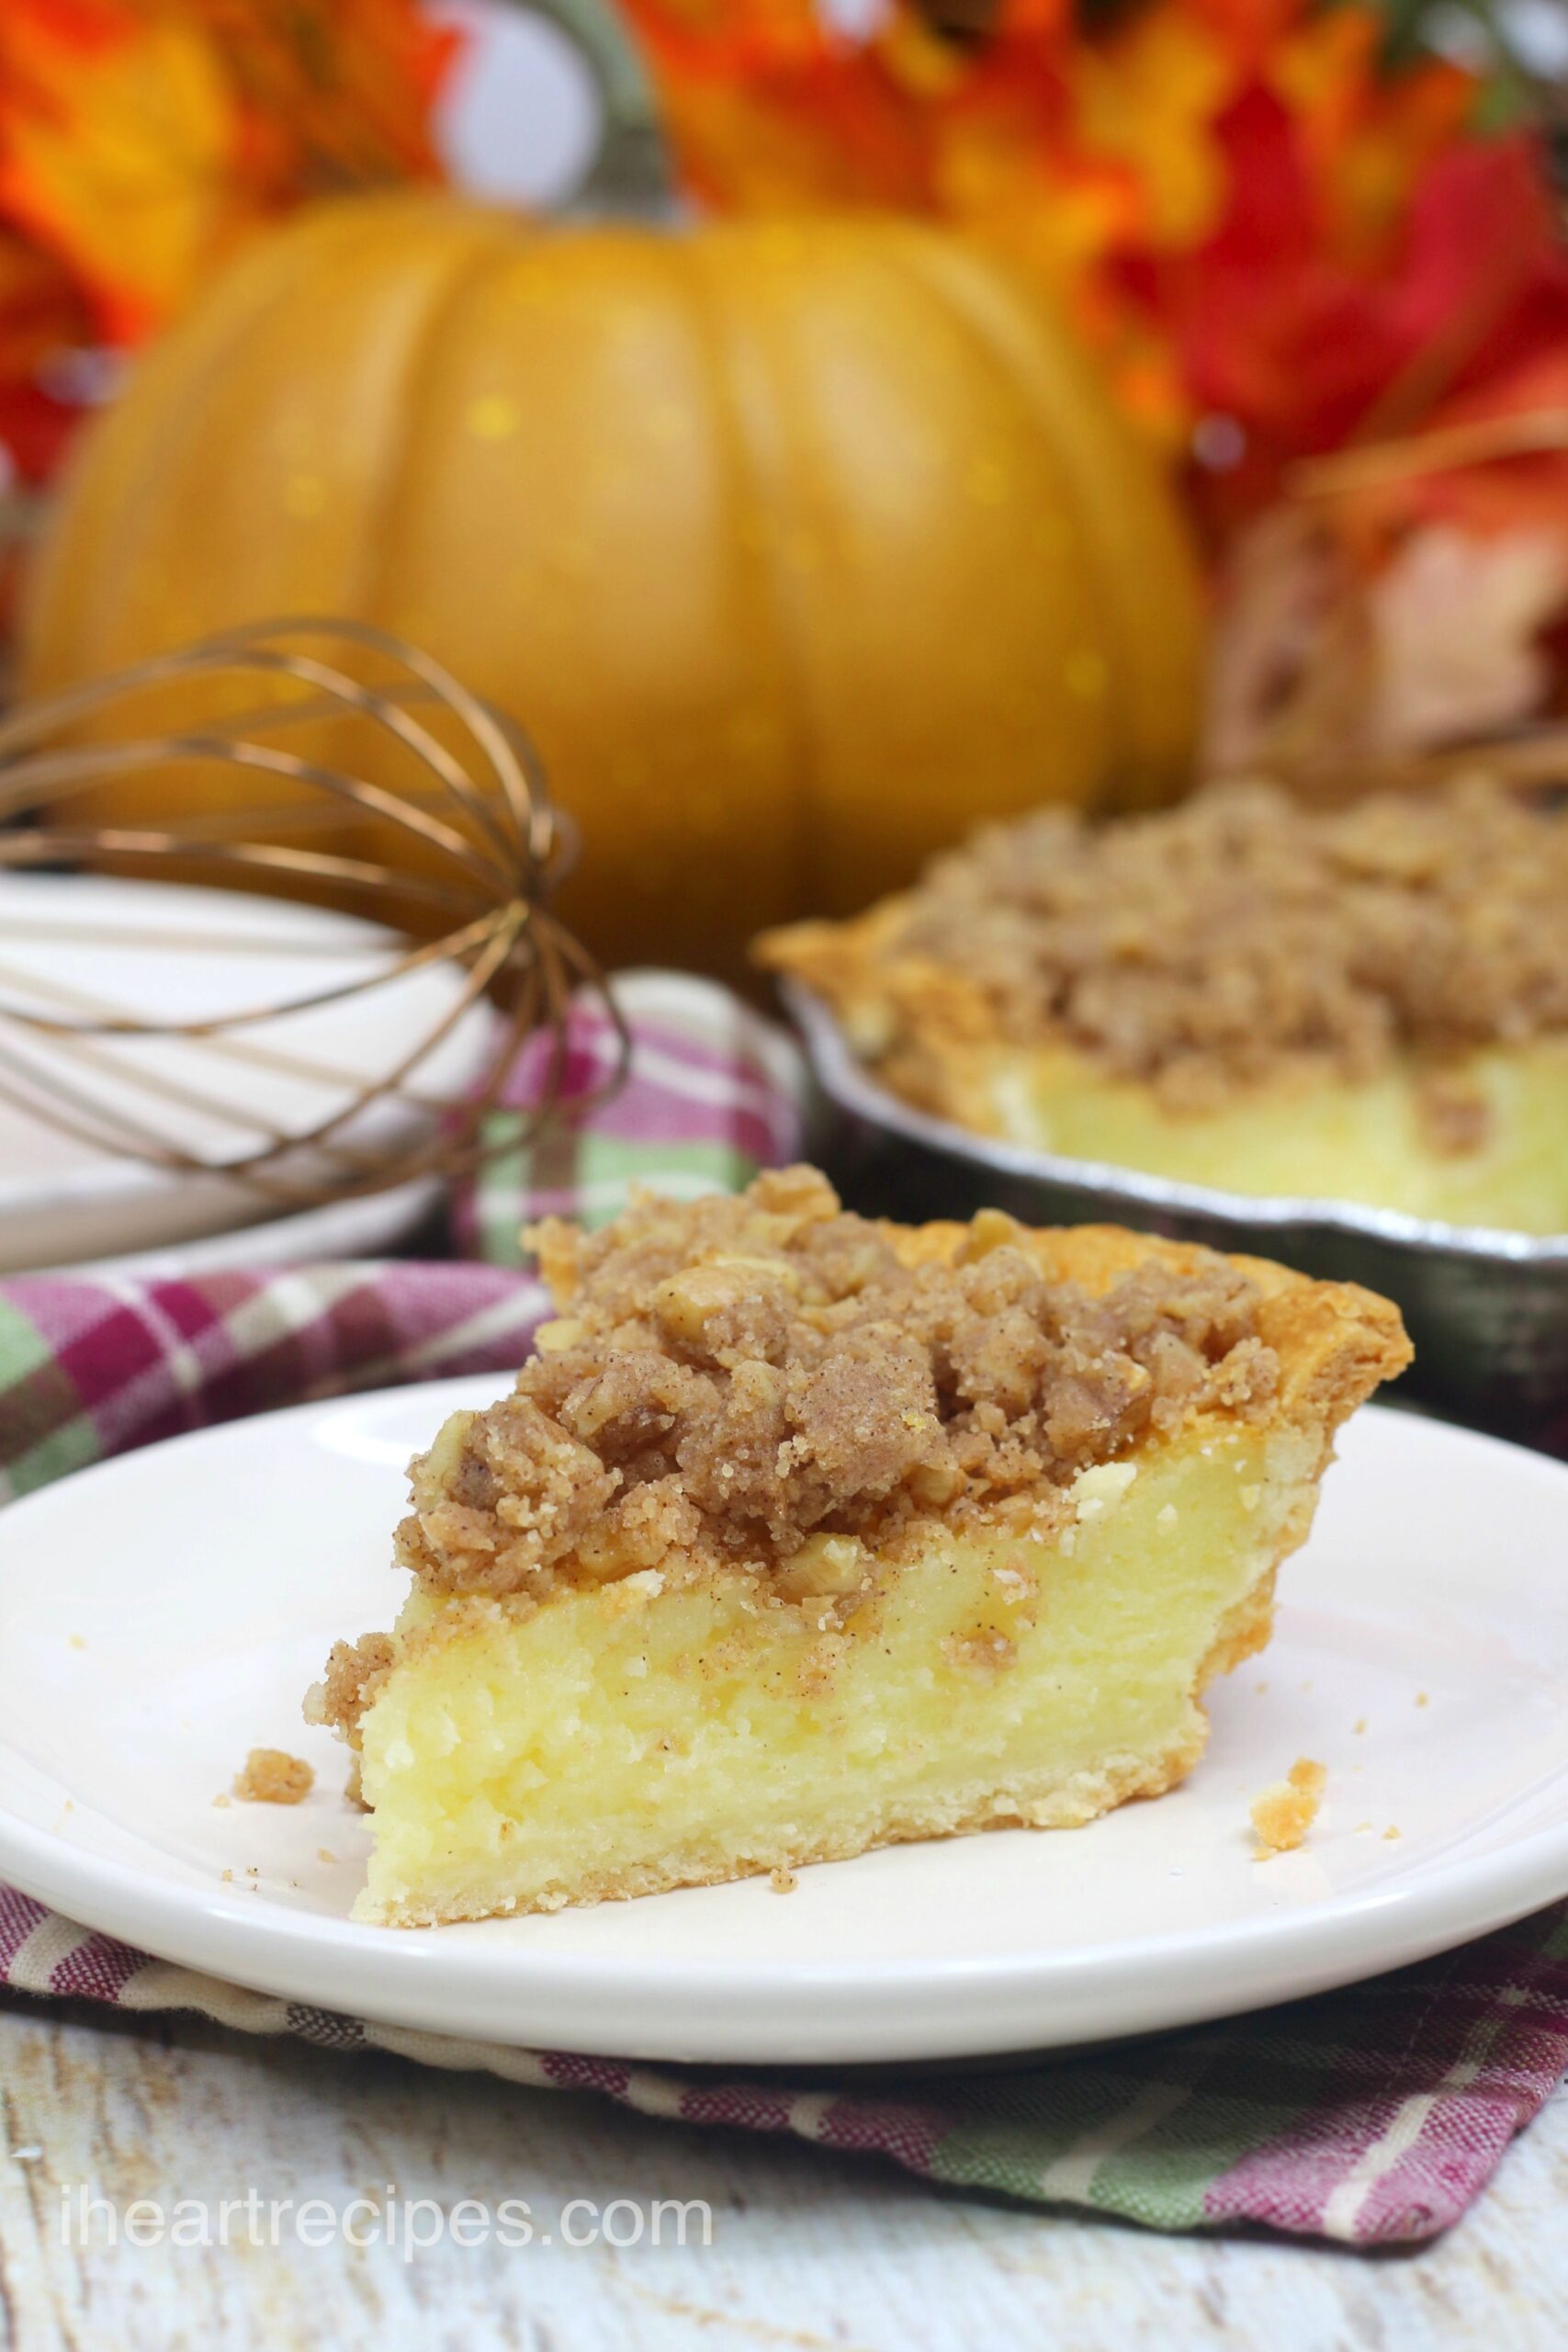 A single slice of streusel buttermilk pie served on a plate. This holiday pie has a creamy buttermilk filling topped with a classic homemade streusel.